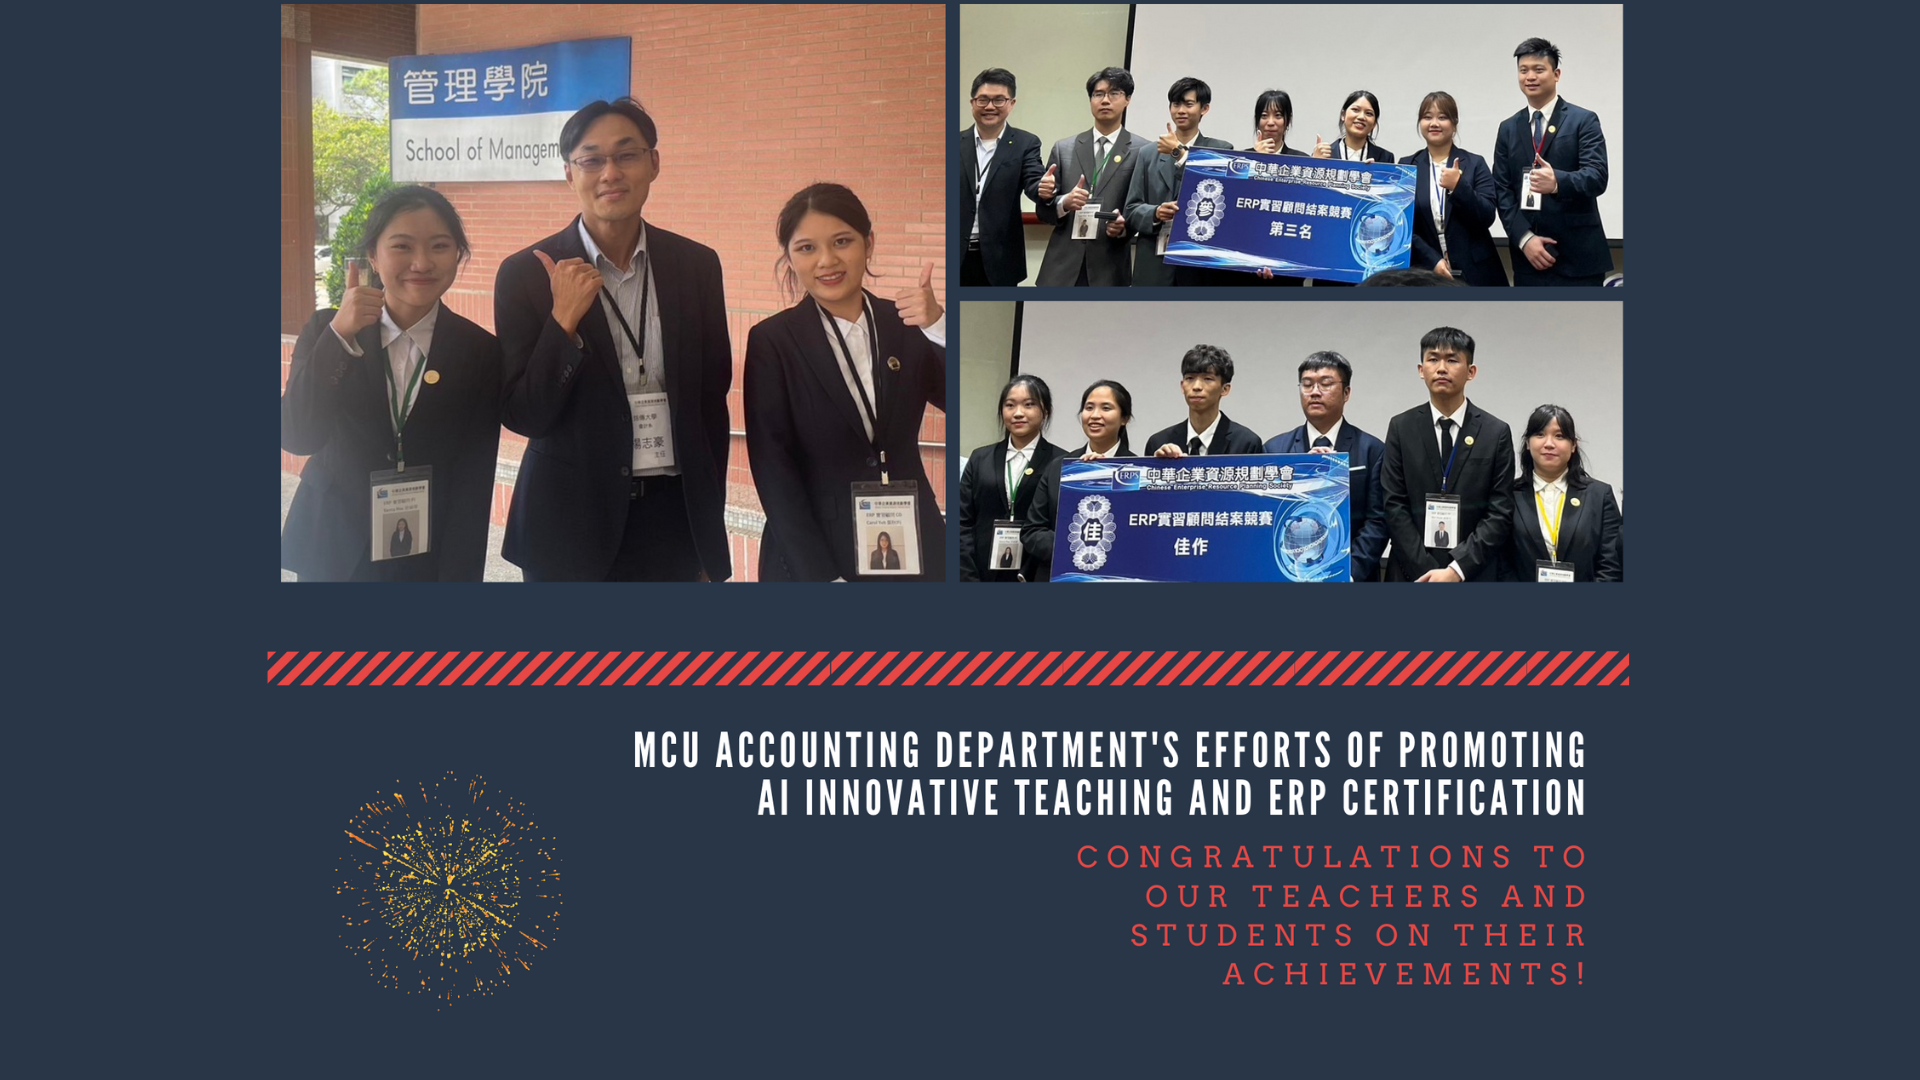 Featured image for “Congratulations to Yu-Ching Hsu and Chiu-Chun Yeh, College Students of Department of Accounting, MCU, for Winning the 3rd Place and Excellent Award from “2023 ERP Consultant Training and Internships” Hosted by Chinese Enterprise Resources Planning Society”